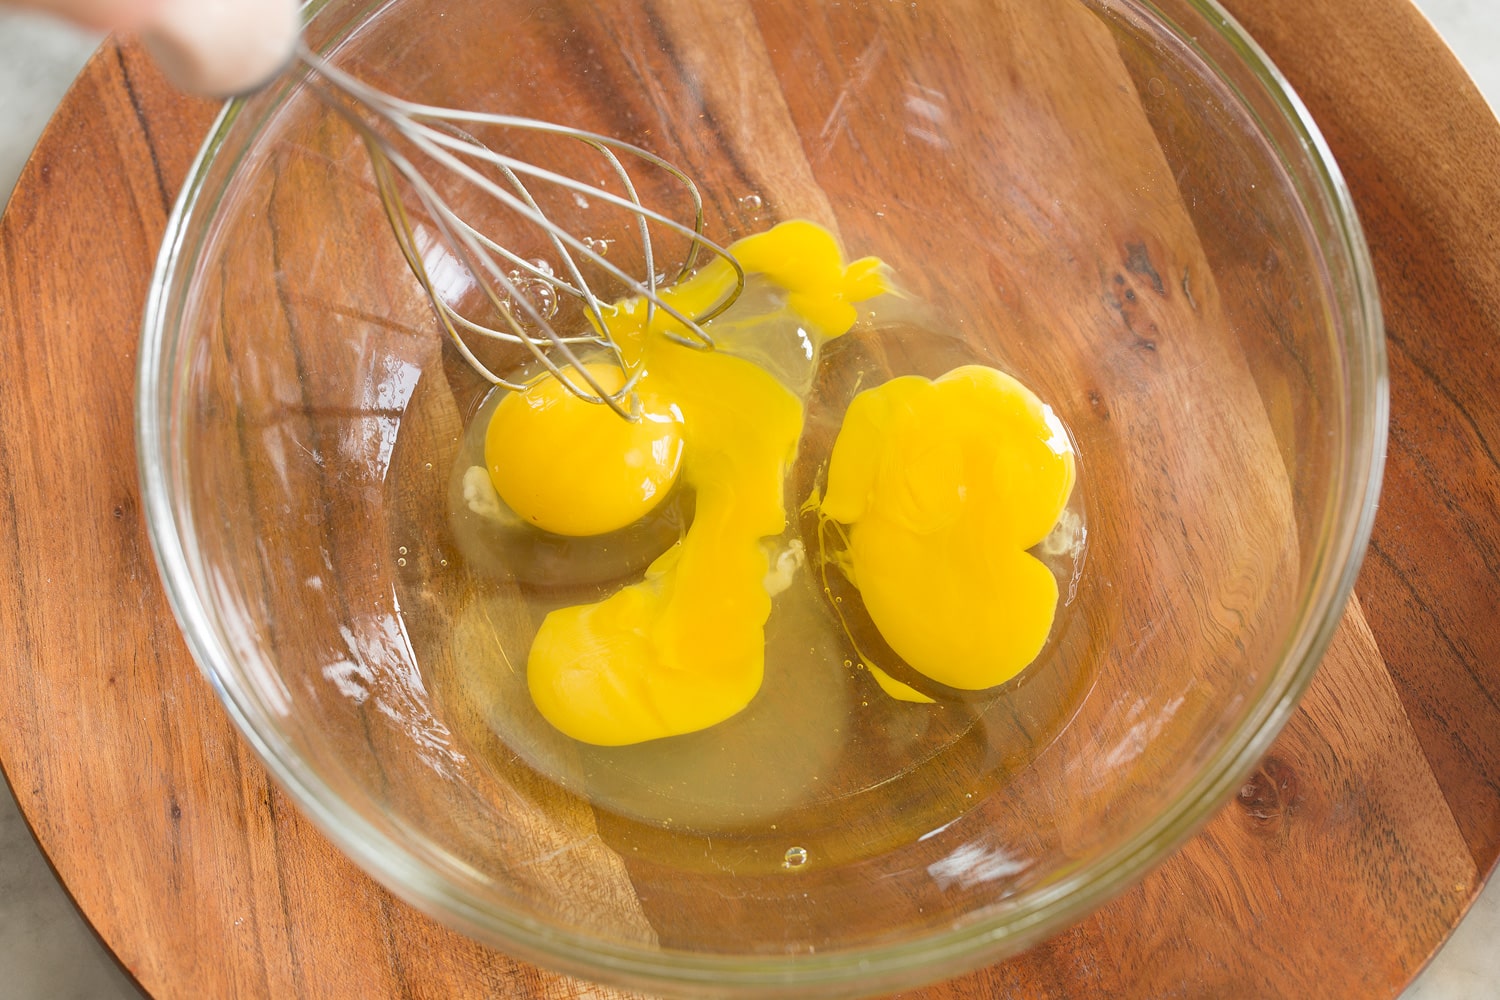 Whisking eggs in mixing bowl.